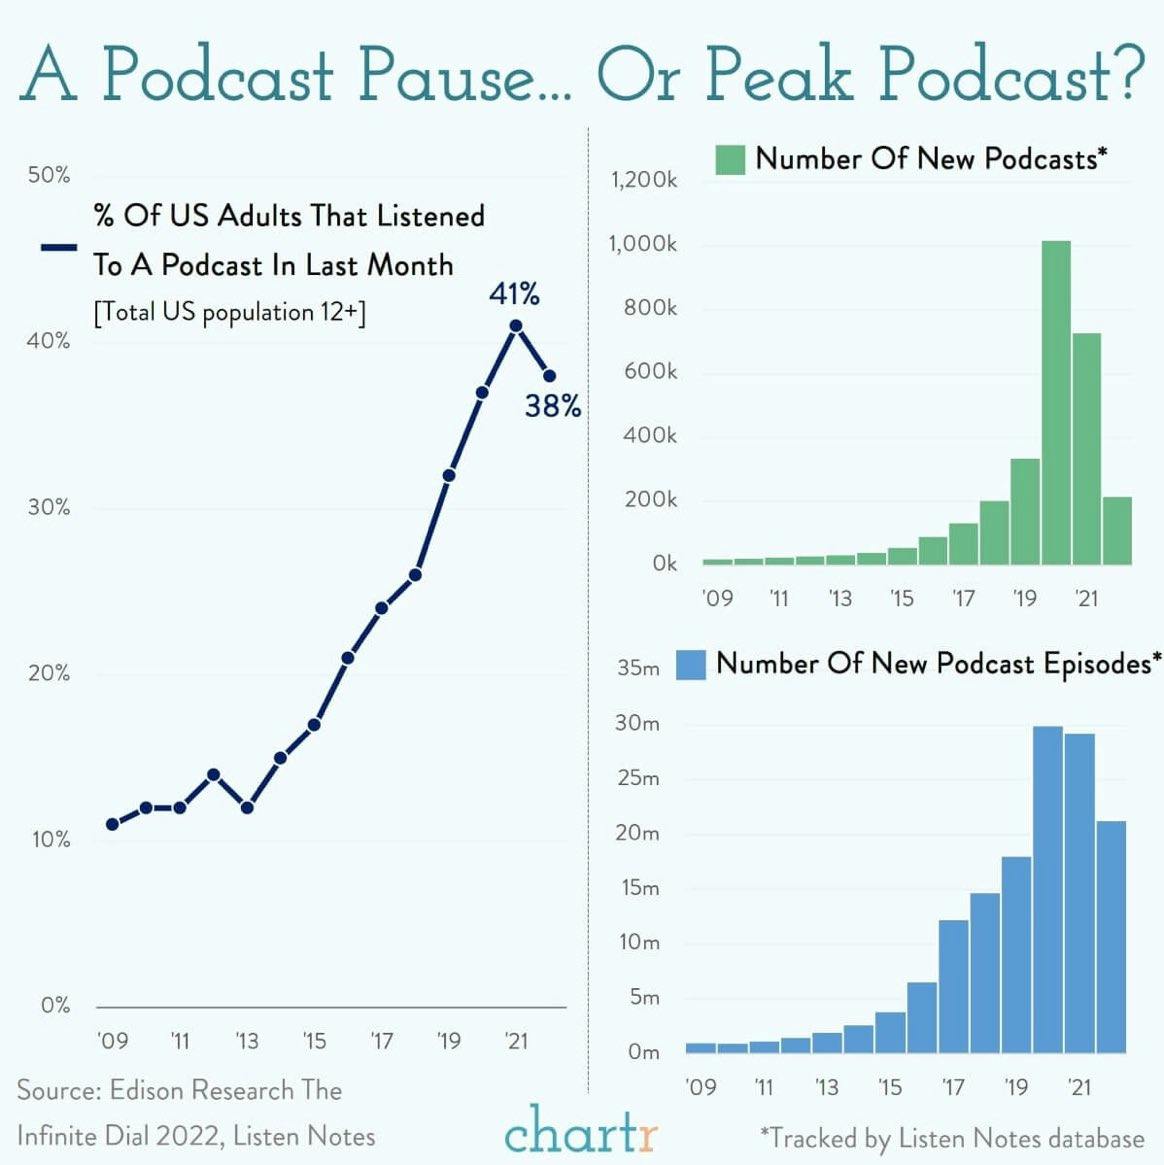 chartr on A podcast pause ... or peak podcast?